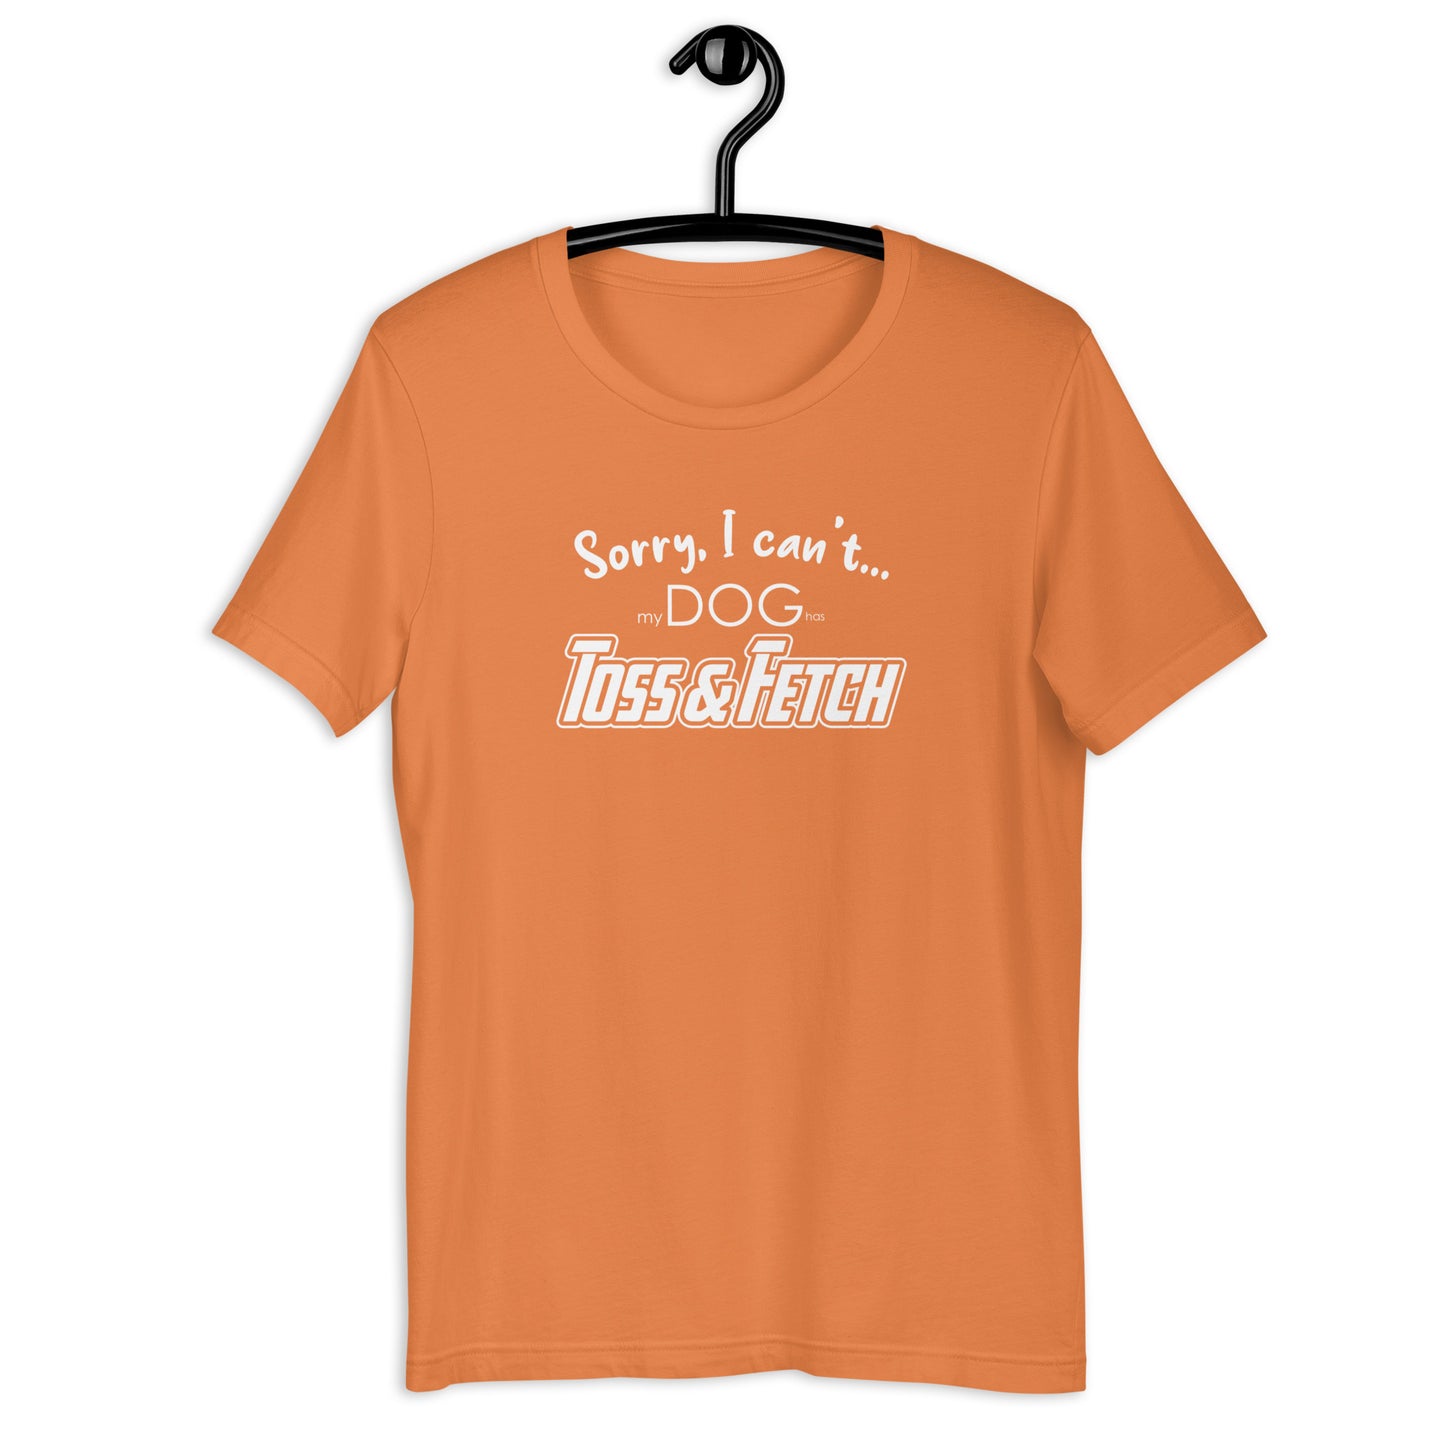 SORRY CANT - TOSS N FETCH - Unisex t-shirt